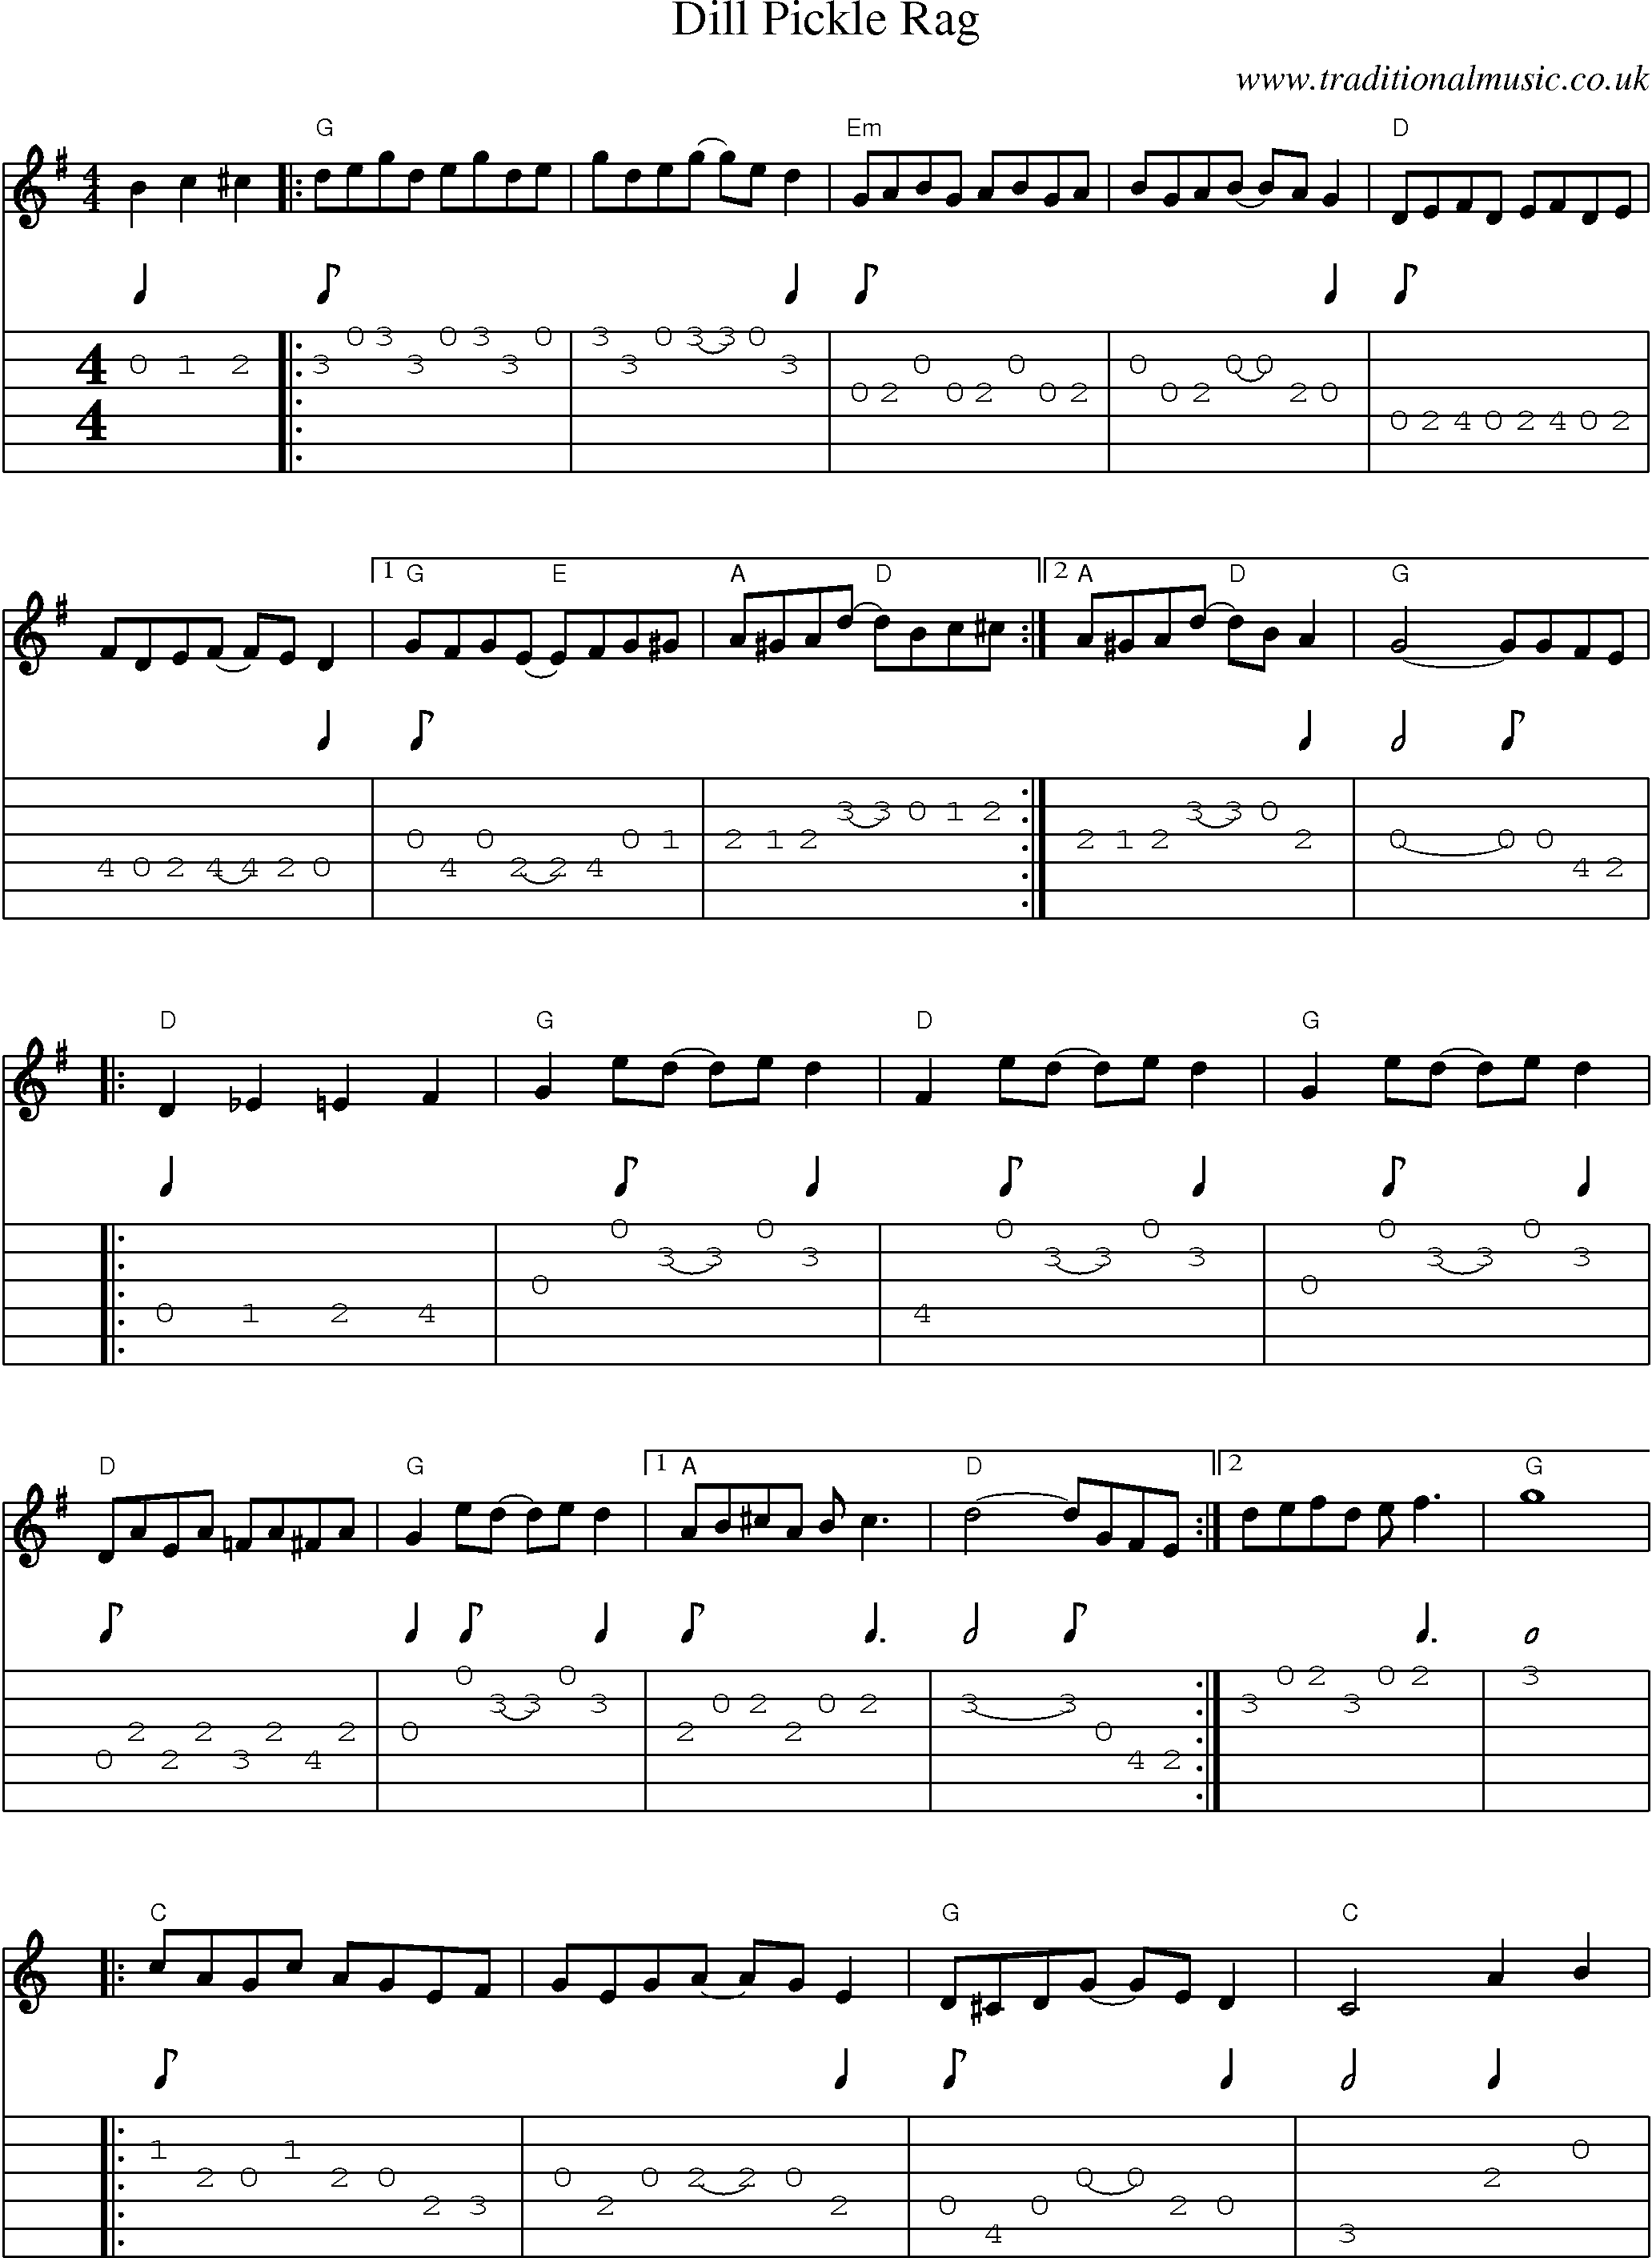 Music Score and Guitar Tabs for Dill Pickle Rag